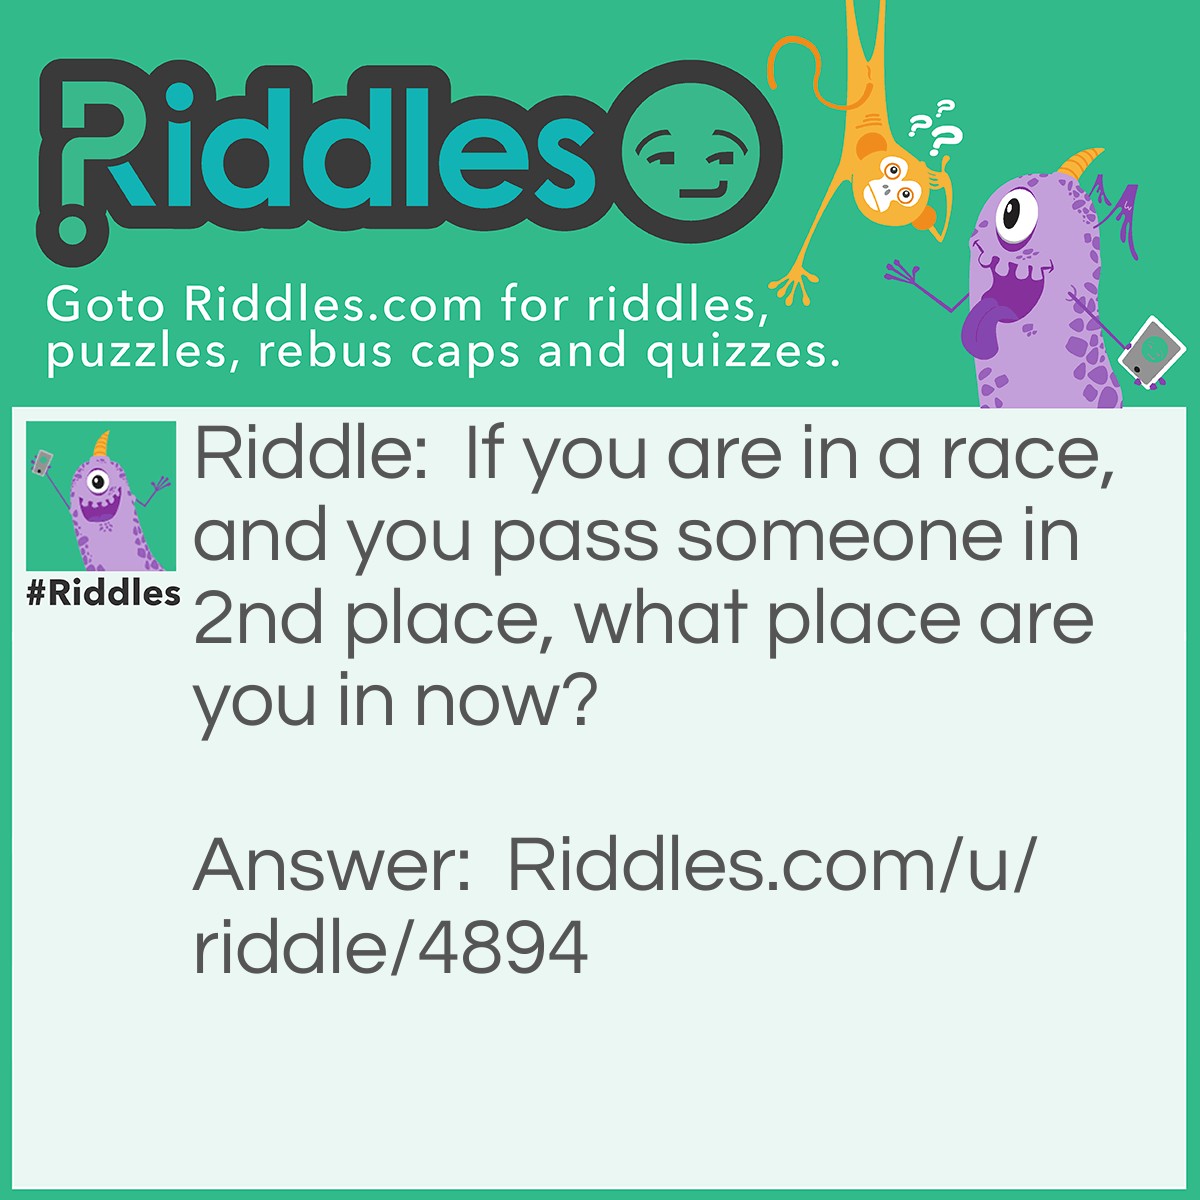 Riddle: If you are in a race, and you pass someone in 2nd place, what place are you in now? Answer: 2nd place.